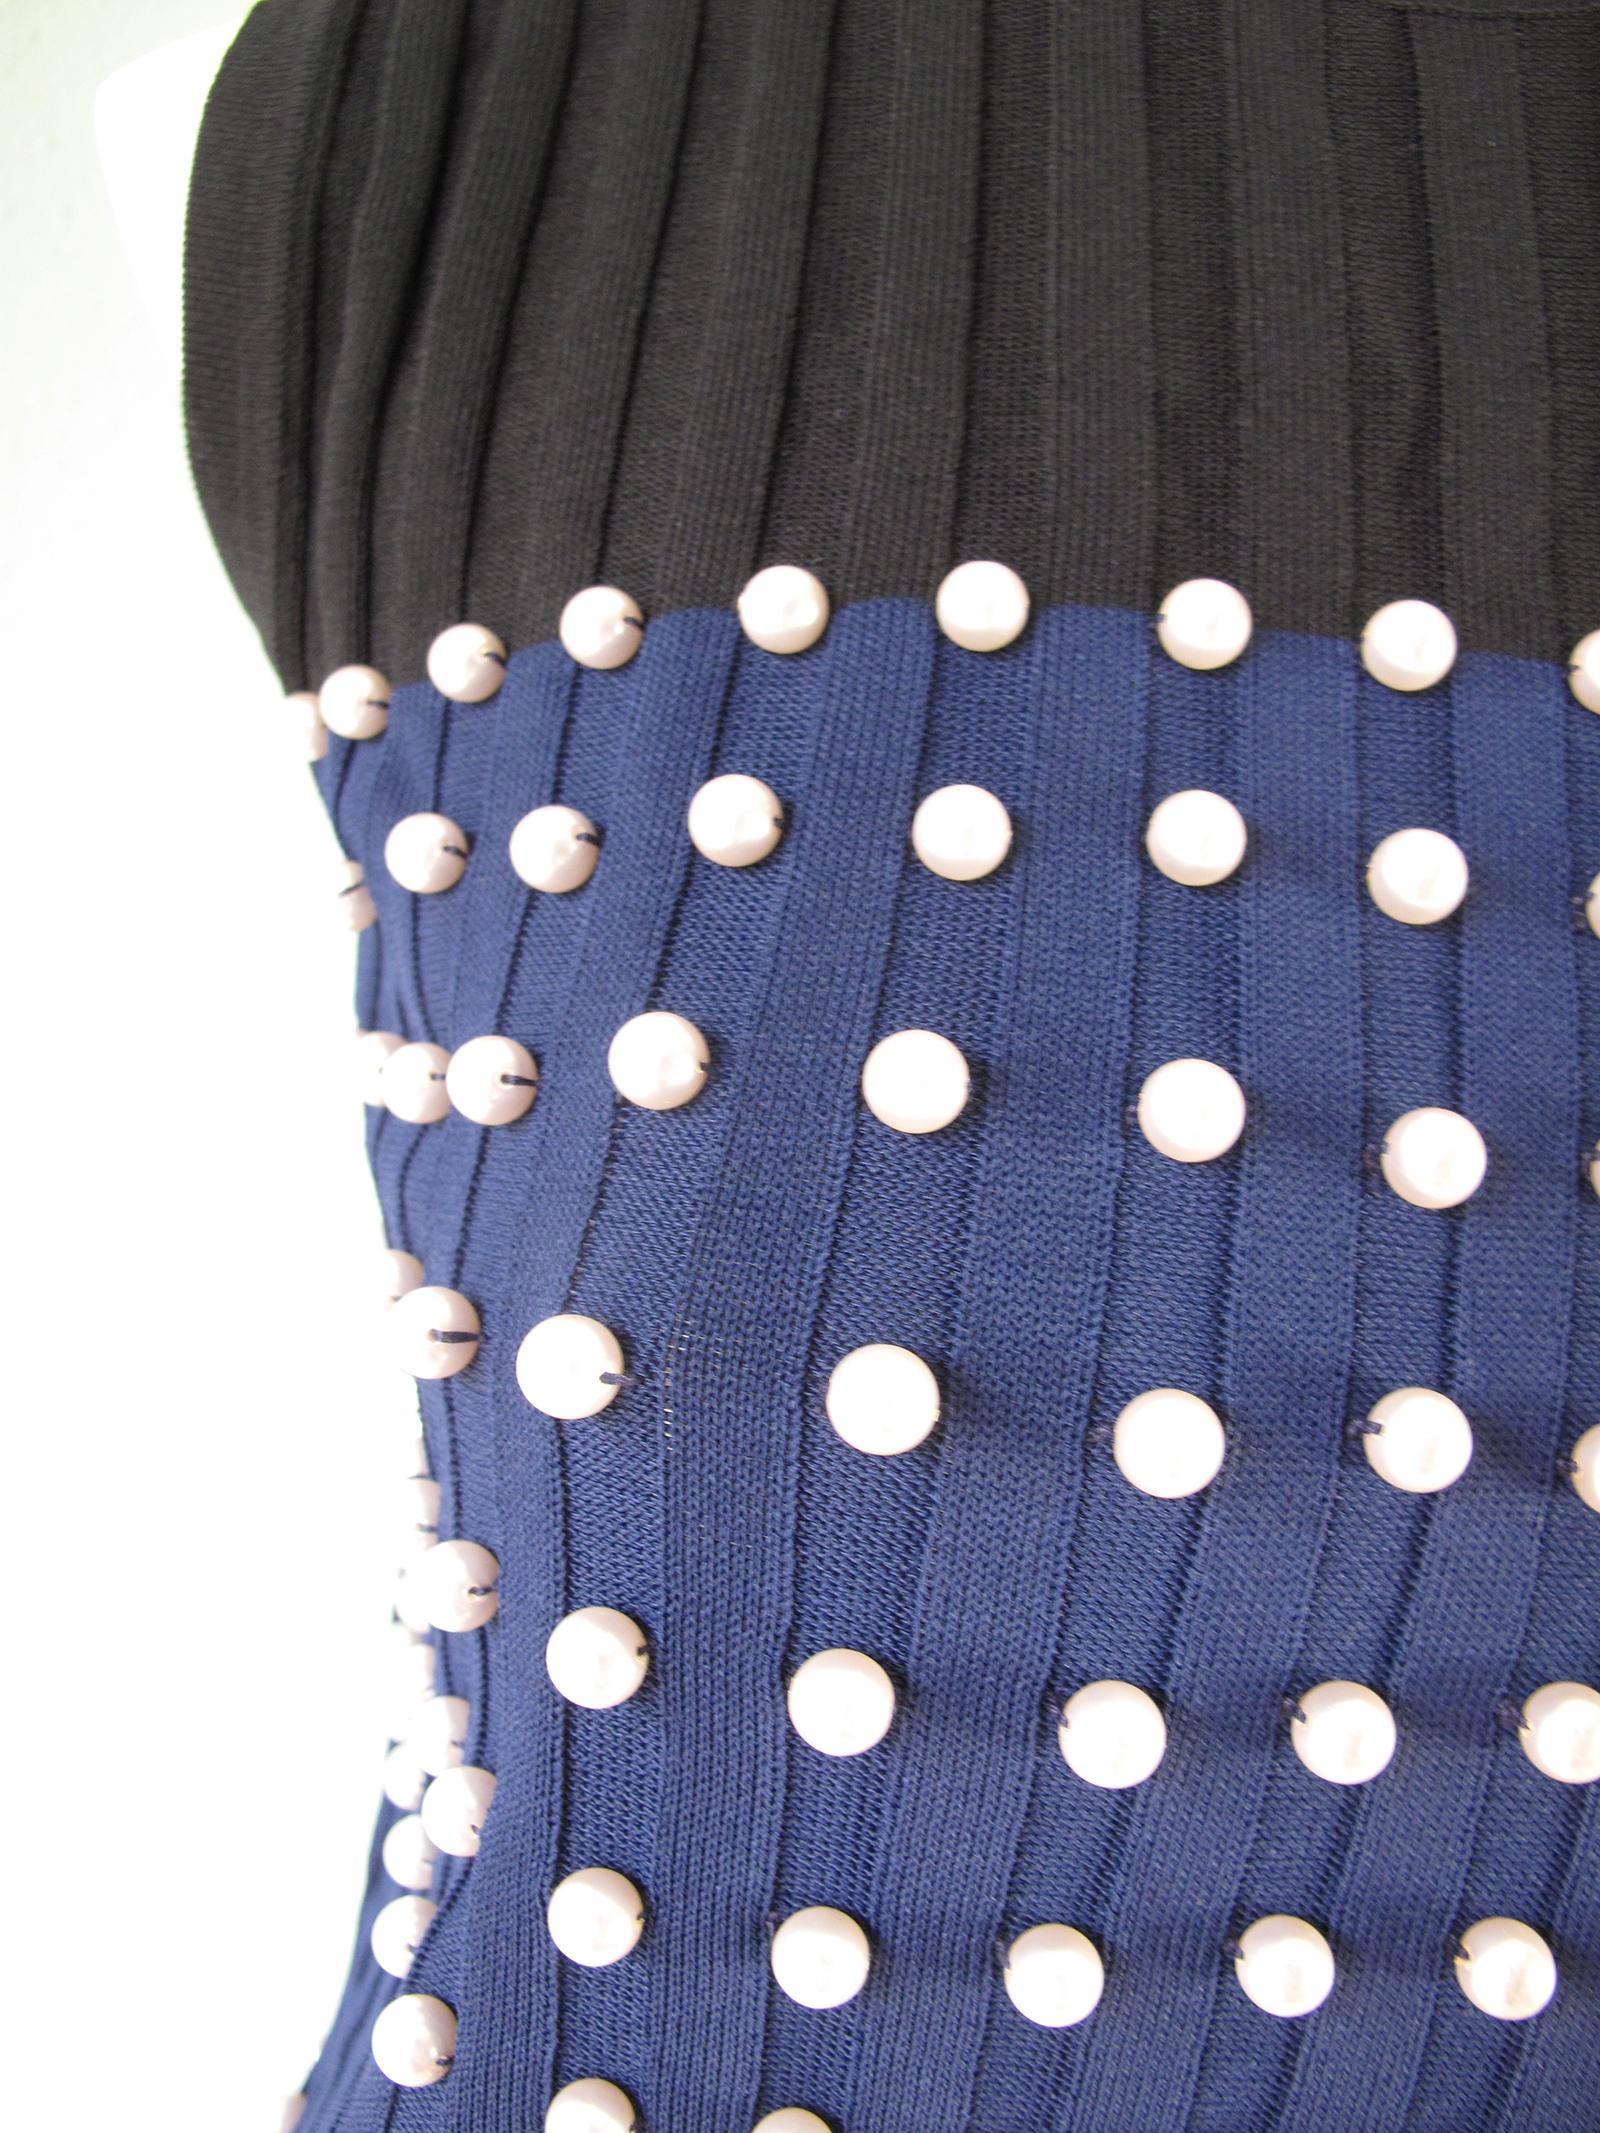 Black and navy sleeveless striped knit dress with faux pearls.  Condition: Excellent. Size 6 / 8

We accept returns for refund, please see our terms.  We offer free ground shipping within the US.